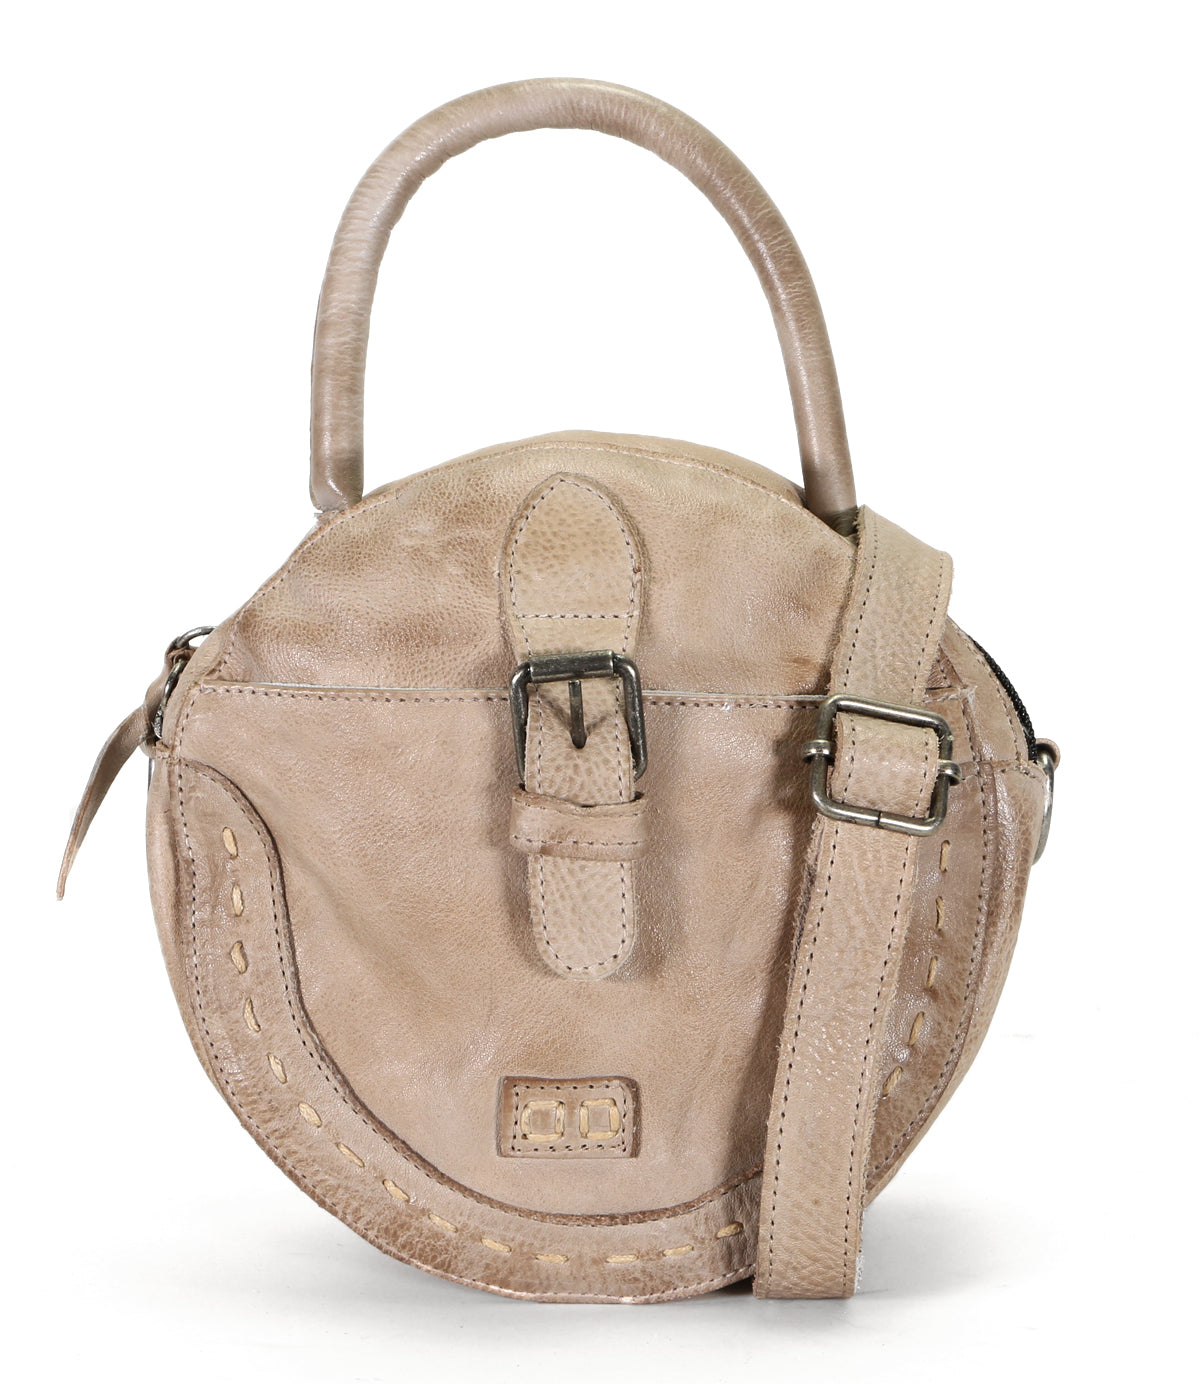 A beige leather Arenfield handbag by Bed Stu with a strap and buckle.